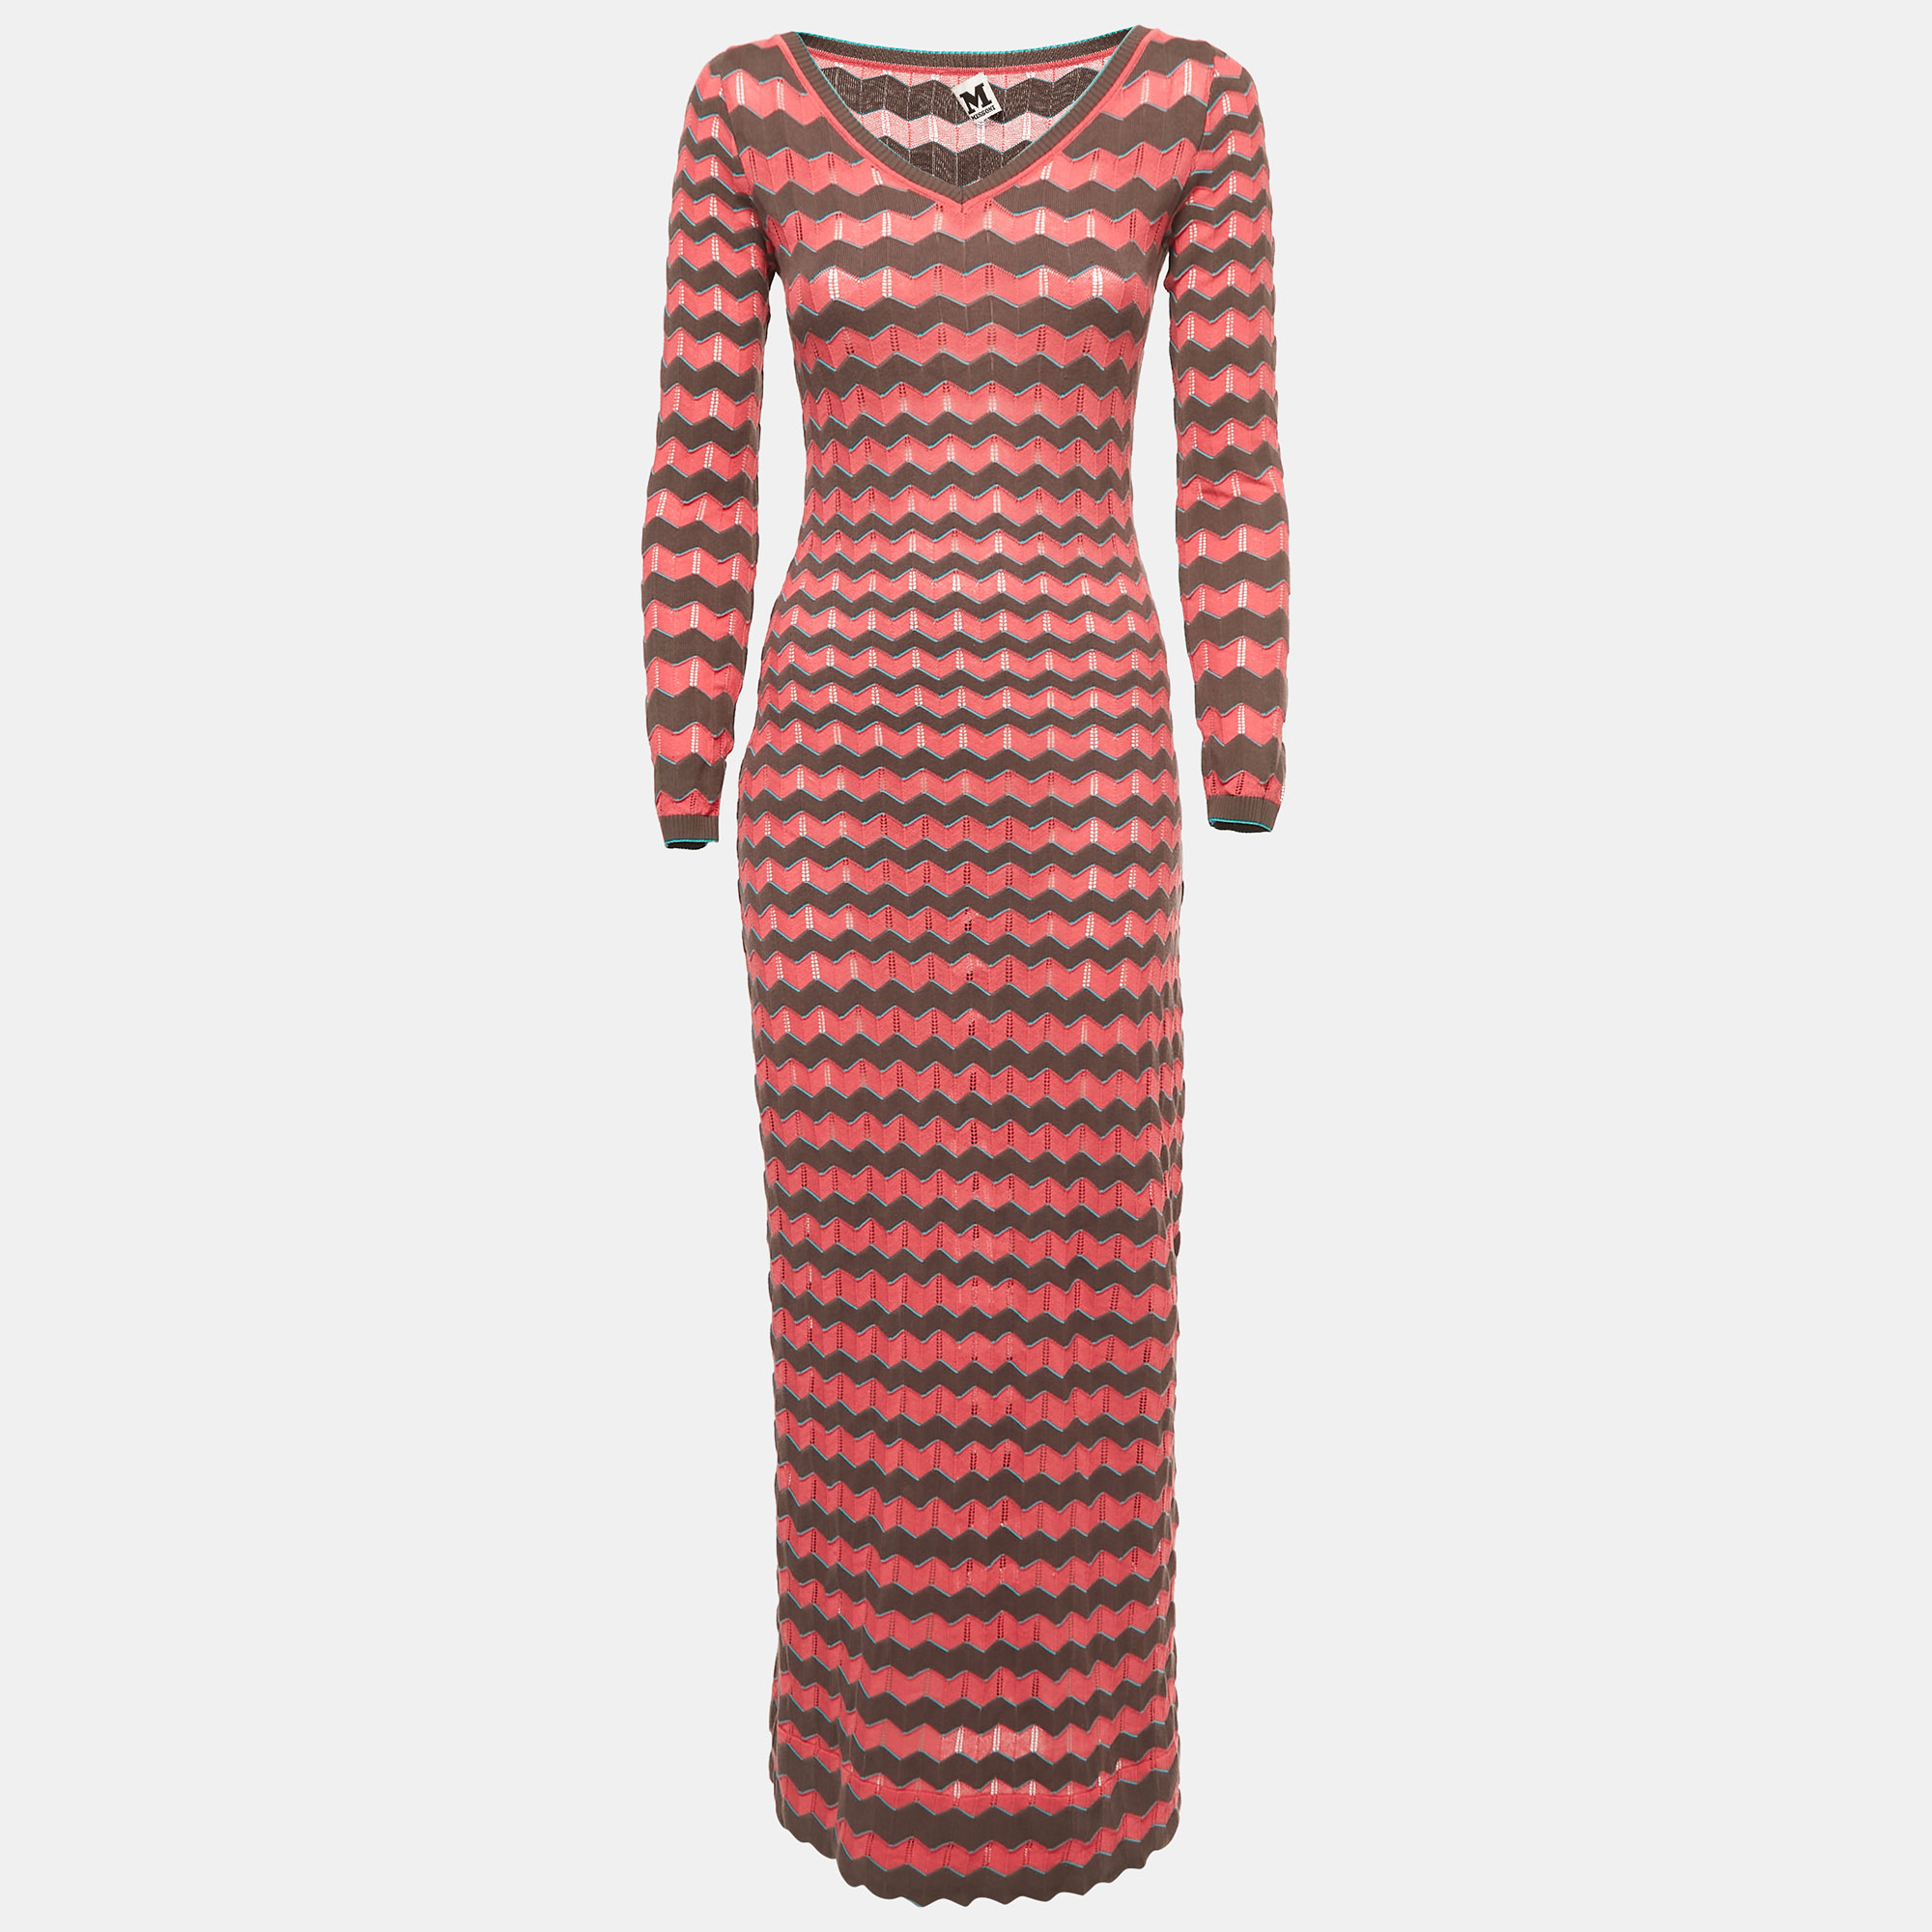 M Missoni Pink/Multicolor Patterned Knit Long Sleeve Maxi Dress S